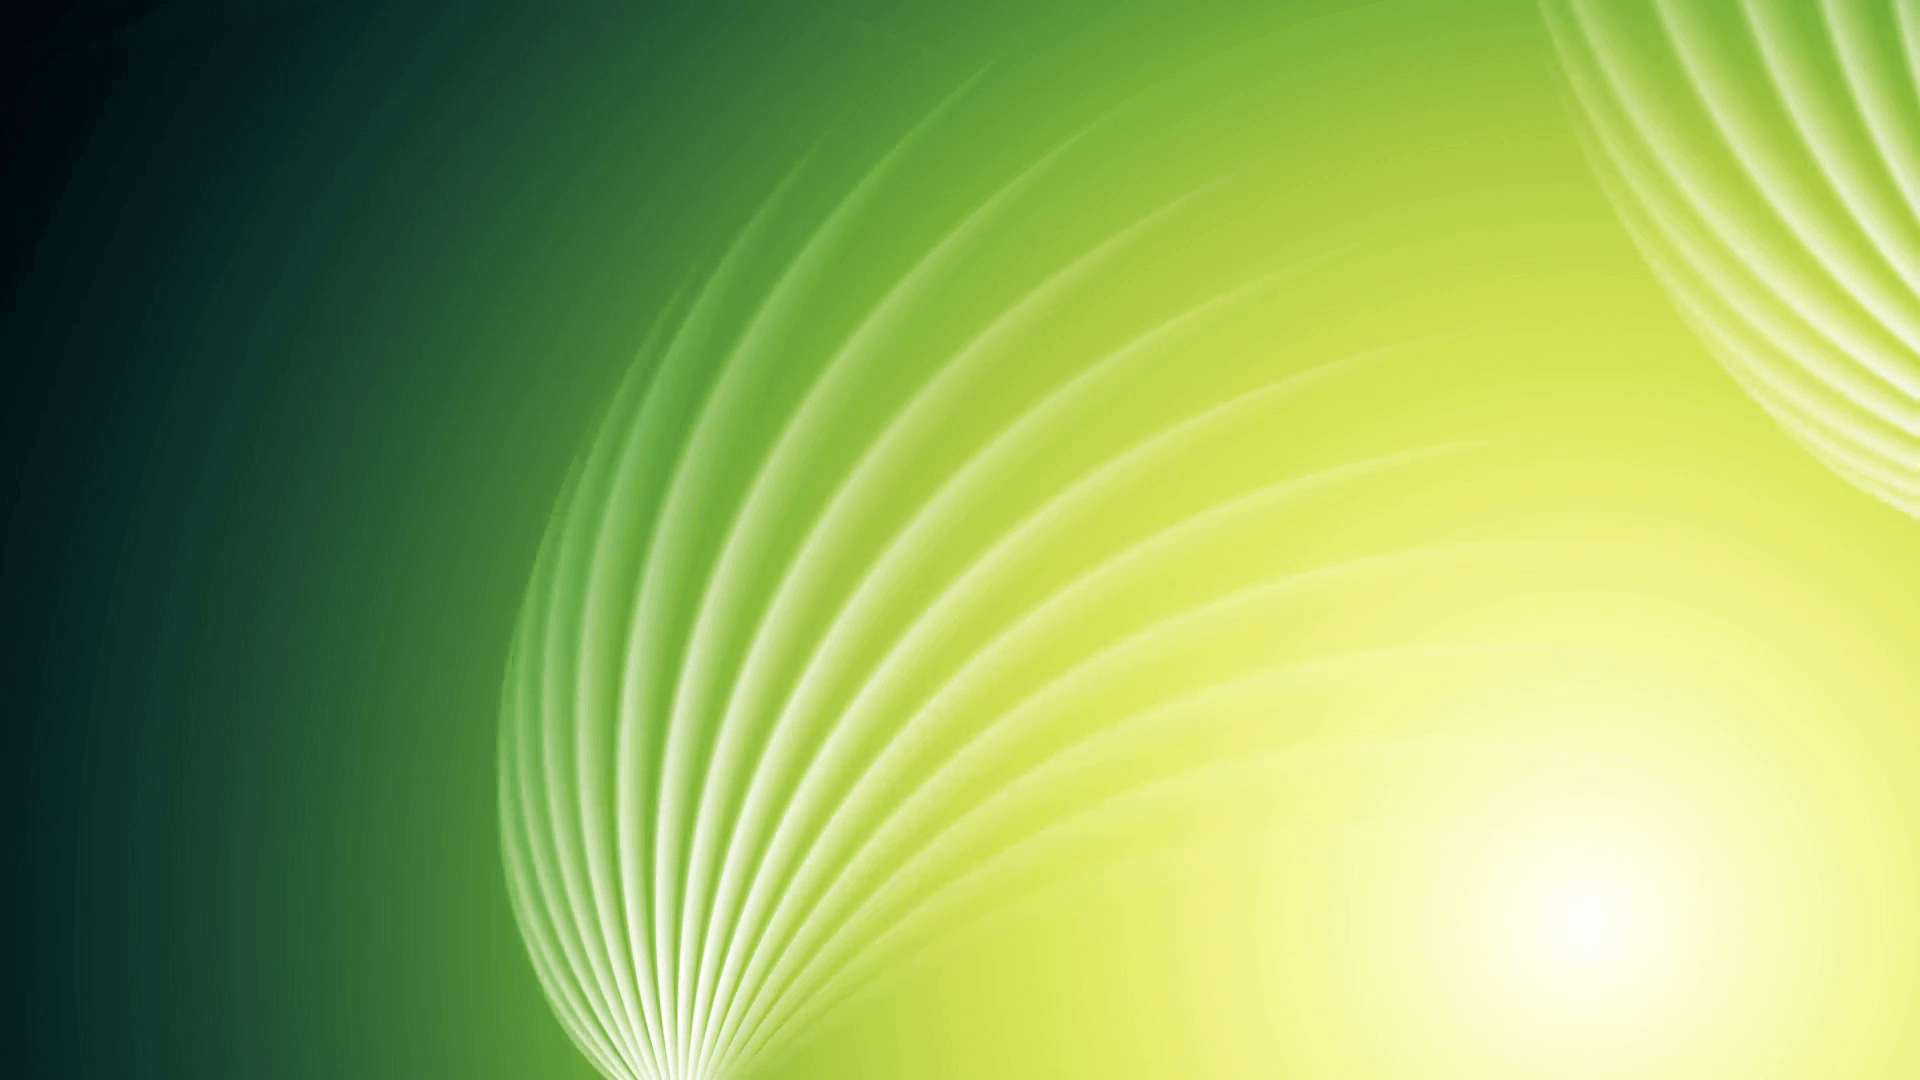 Bright green shiny swirl abstract background. Video graphic design